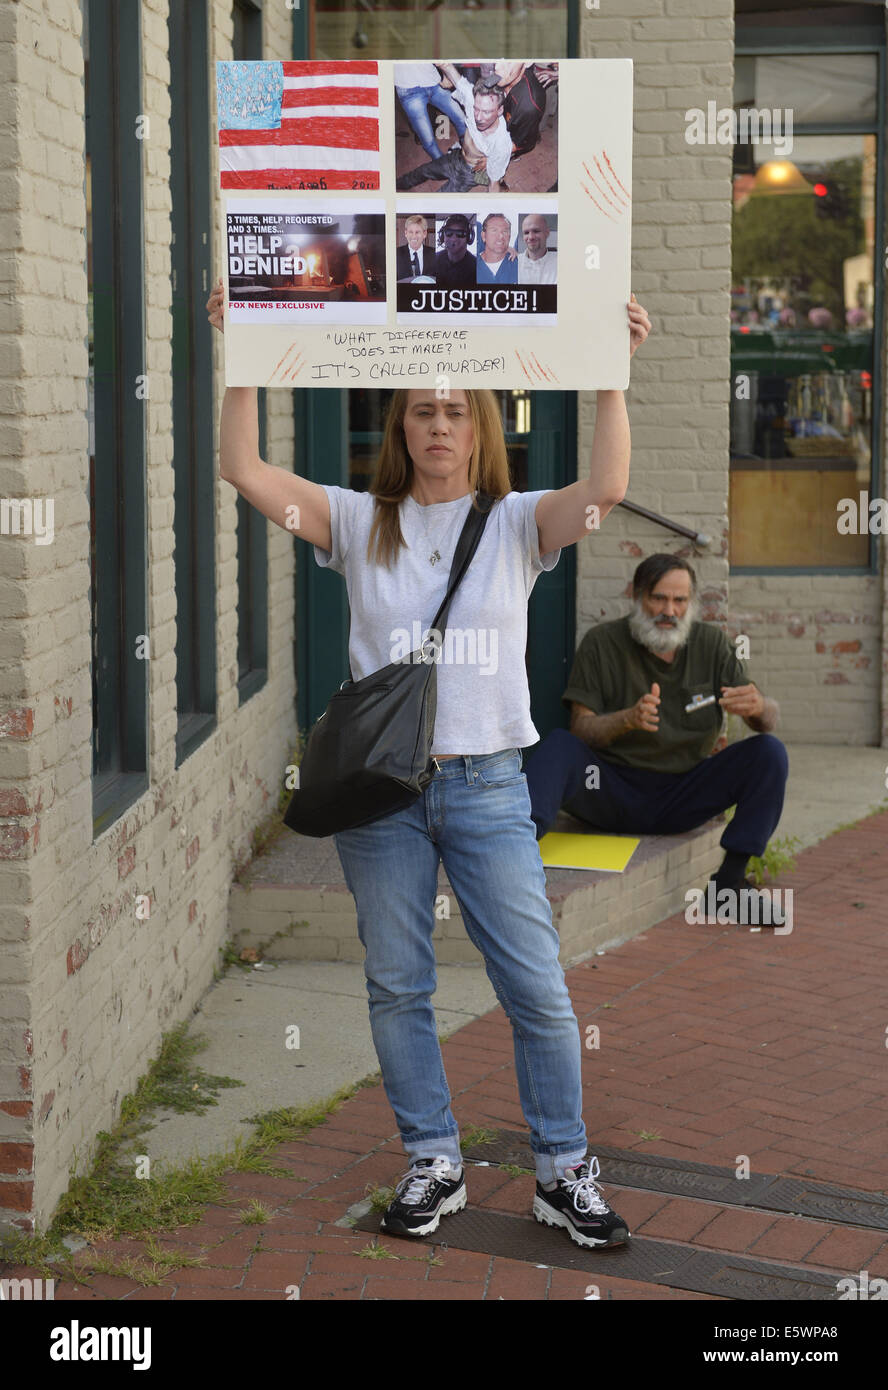 Huntington, New York, USA. 6th Aug, 2014. A protestor holds a sign with ''3 times help requested, 3 times help denied'' about the bombing in Benghazi that resulted in death of U.S. Ambassador Stevens and 3 other Americans, as she stand outside the Book Revue where H. Clinton will have a book signing for her new memoir, Hard Choices at 6pm. Clinton's book is about her four years as America's 67th Secretary of State and how they influence her view of the future. Credit:  Ann Parry/ZUMA Wire/Alamy Live News Stock Photo